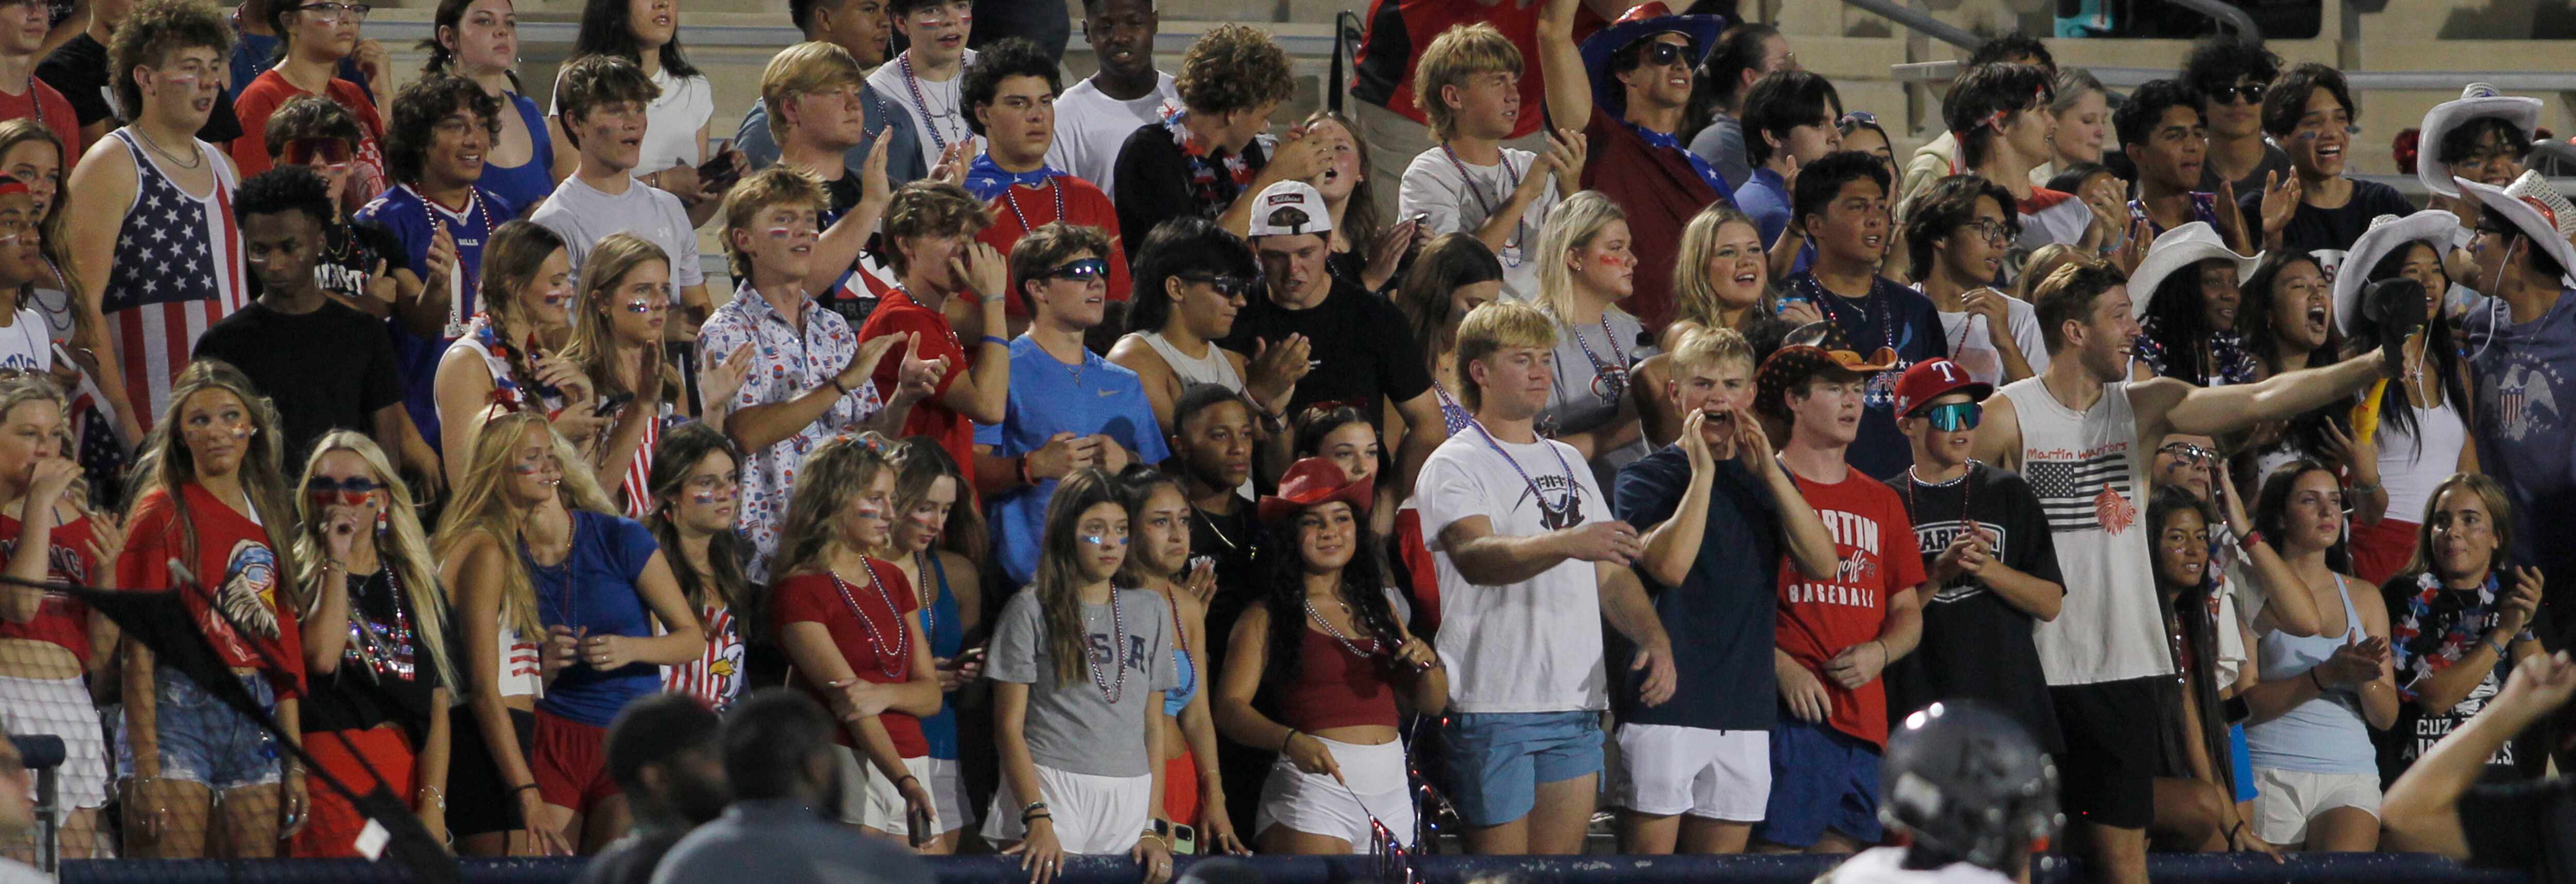 Fans filling the Arlington Martin student section look on during first quarter action of the...